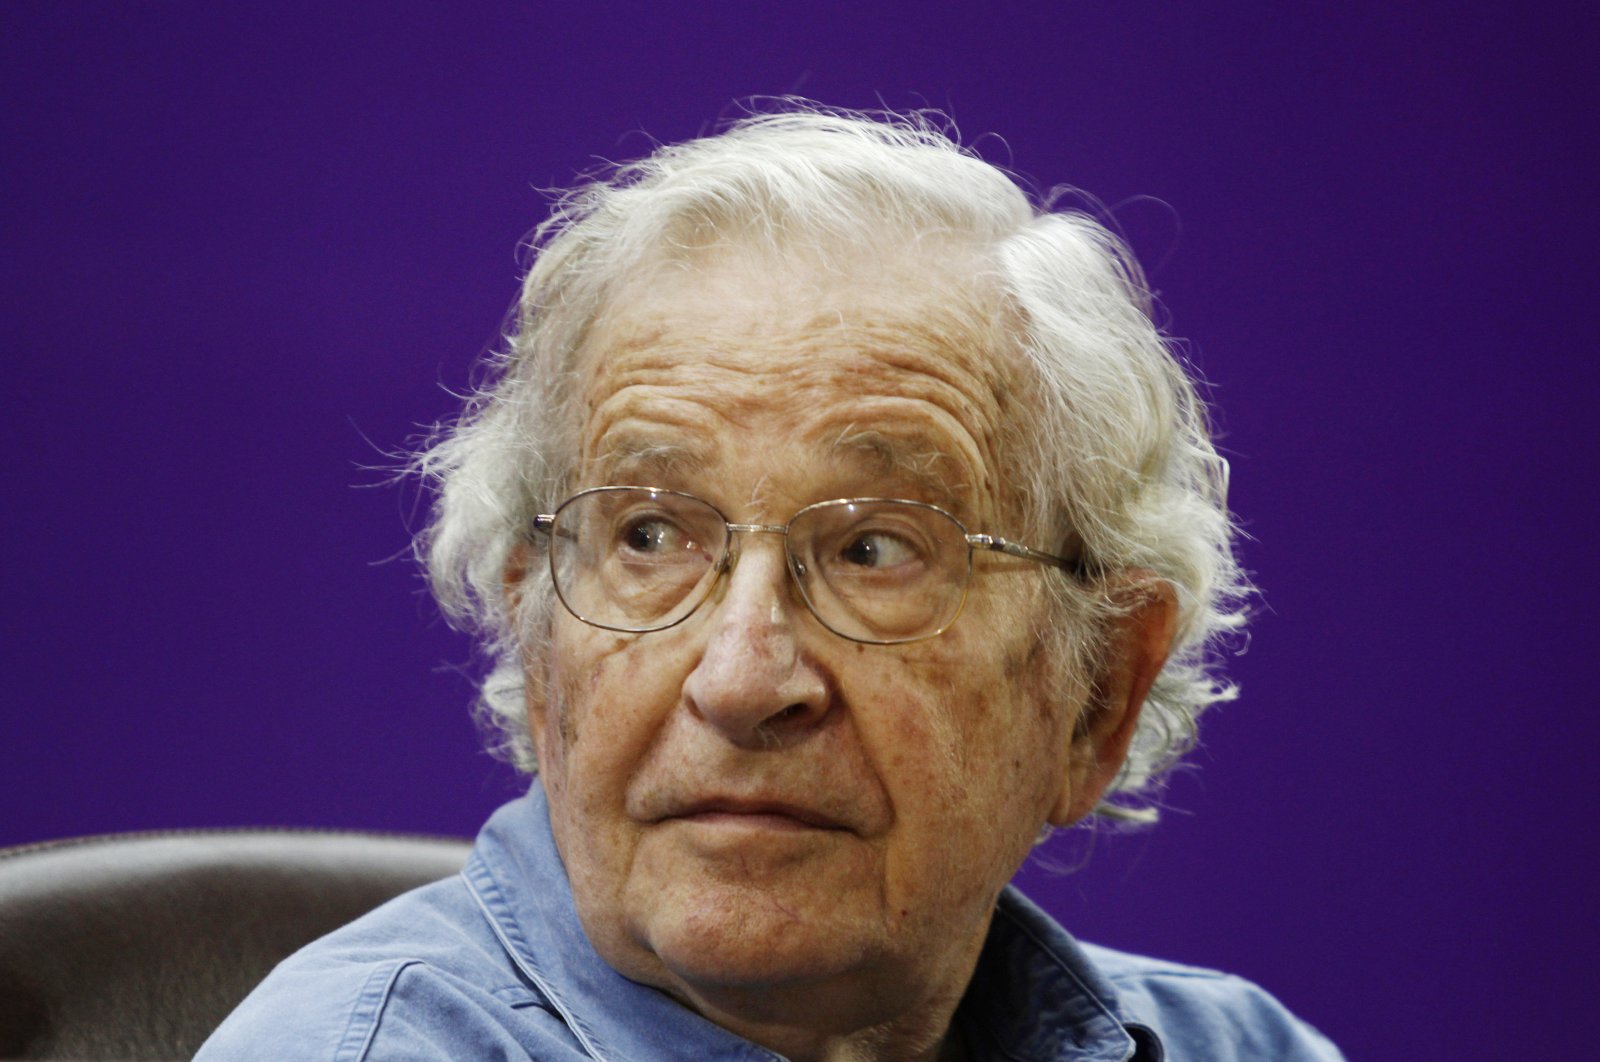 Chomsky released from hospital, his wife denies reports of death